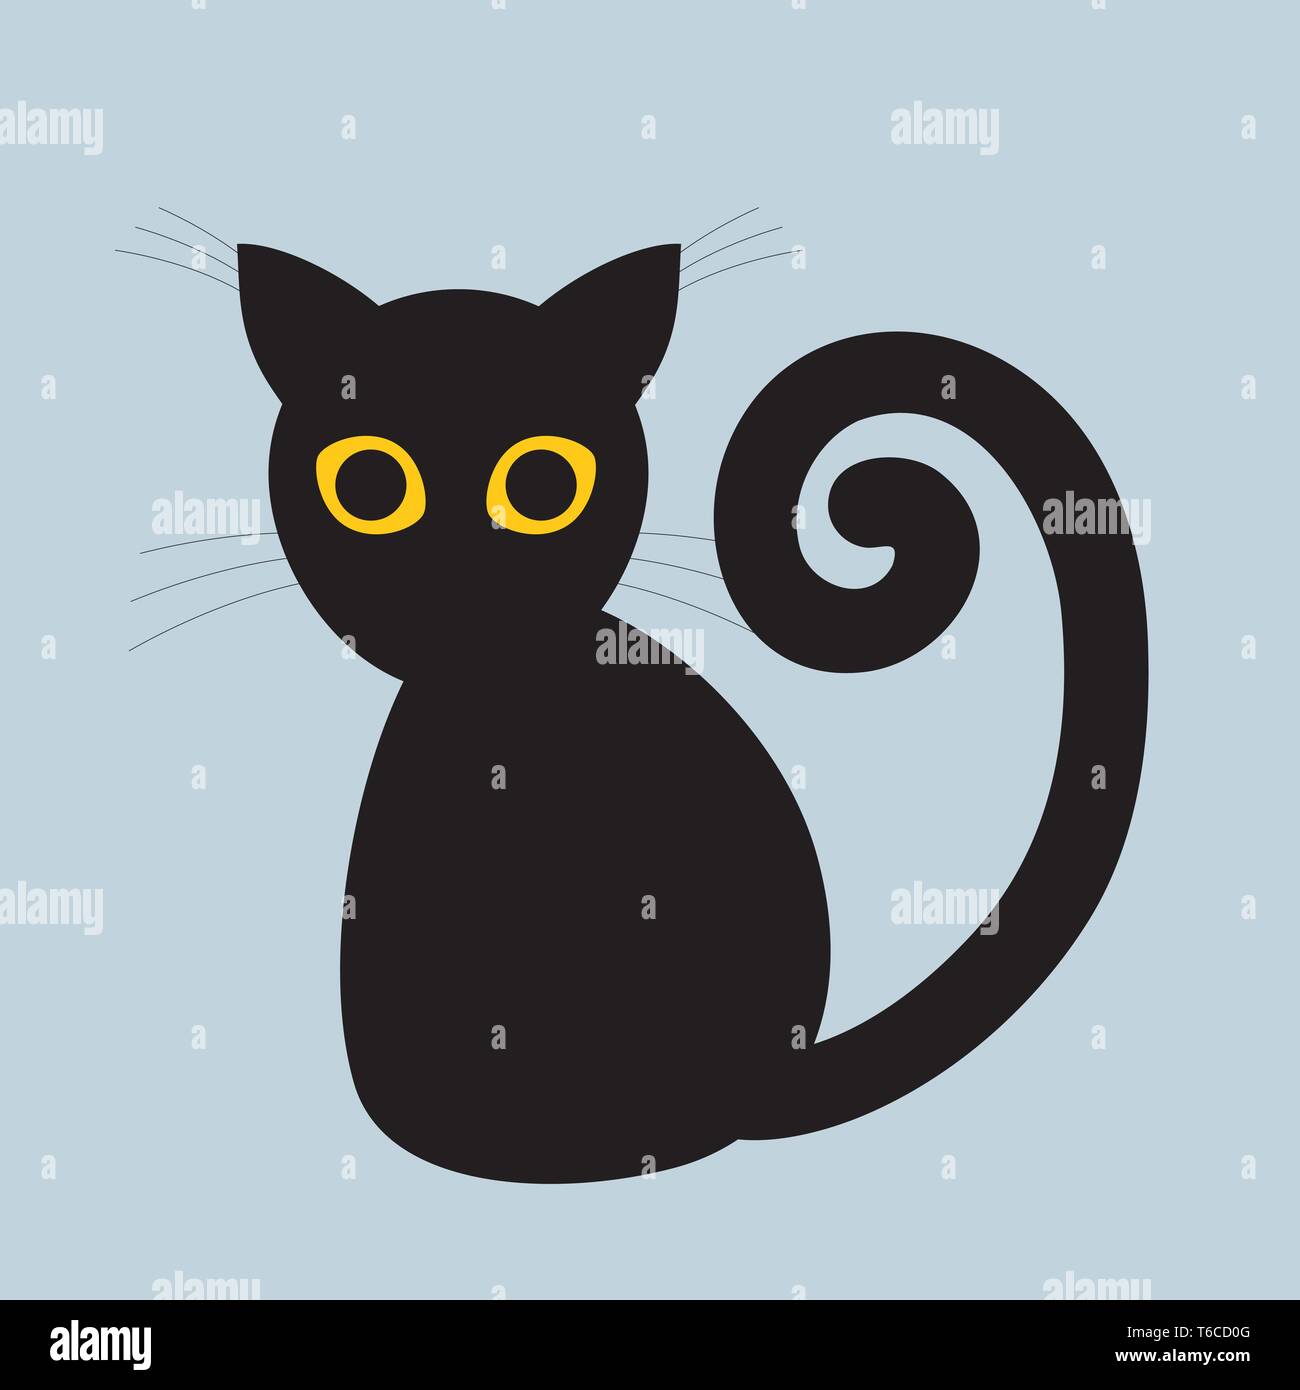 A simple silhouette drawing of a black cat with yellow eyes Stock Vector